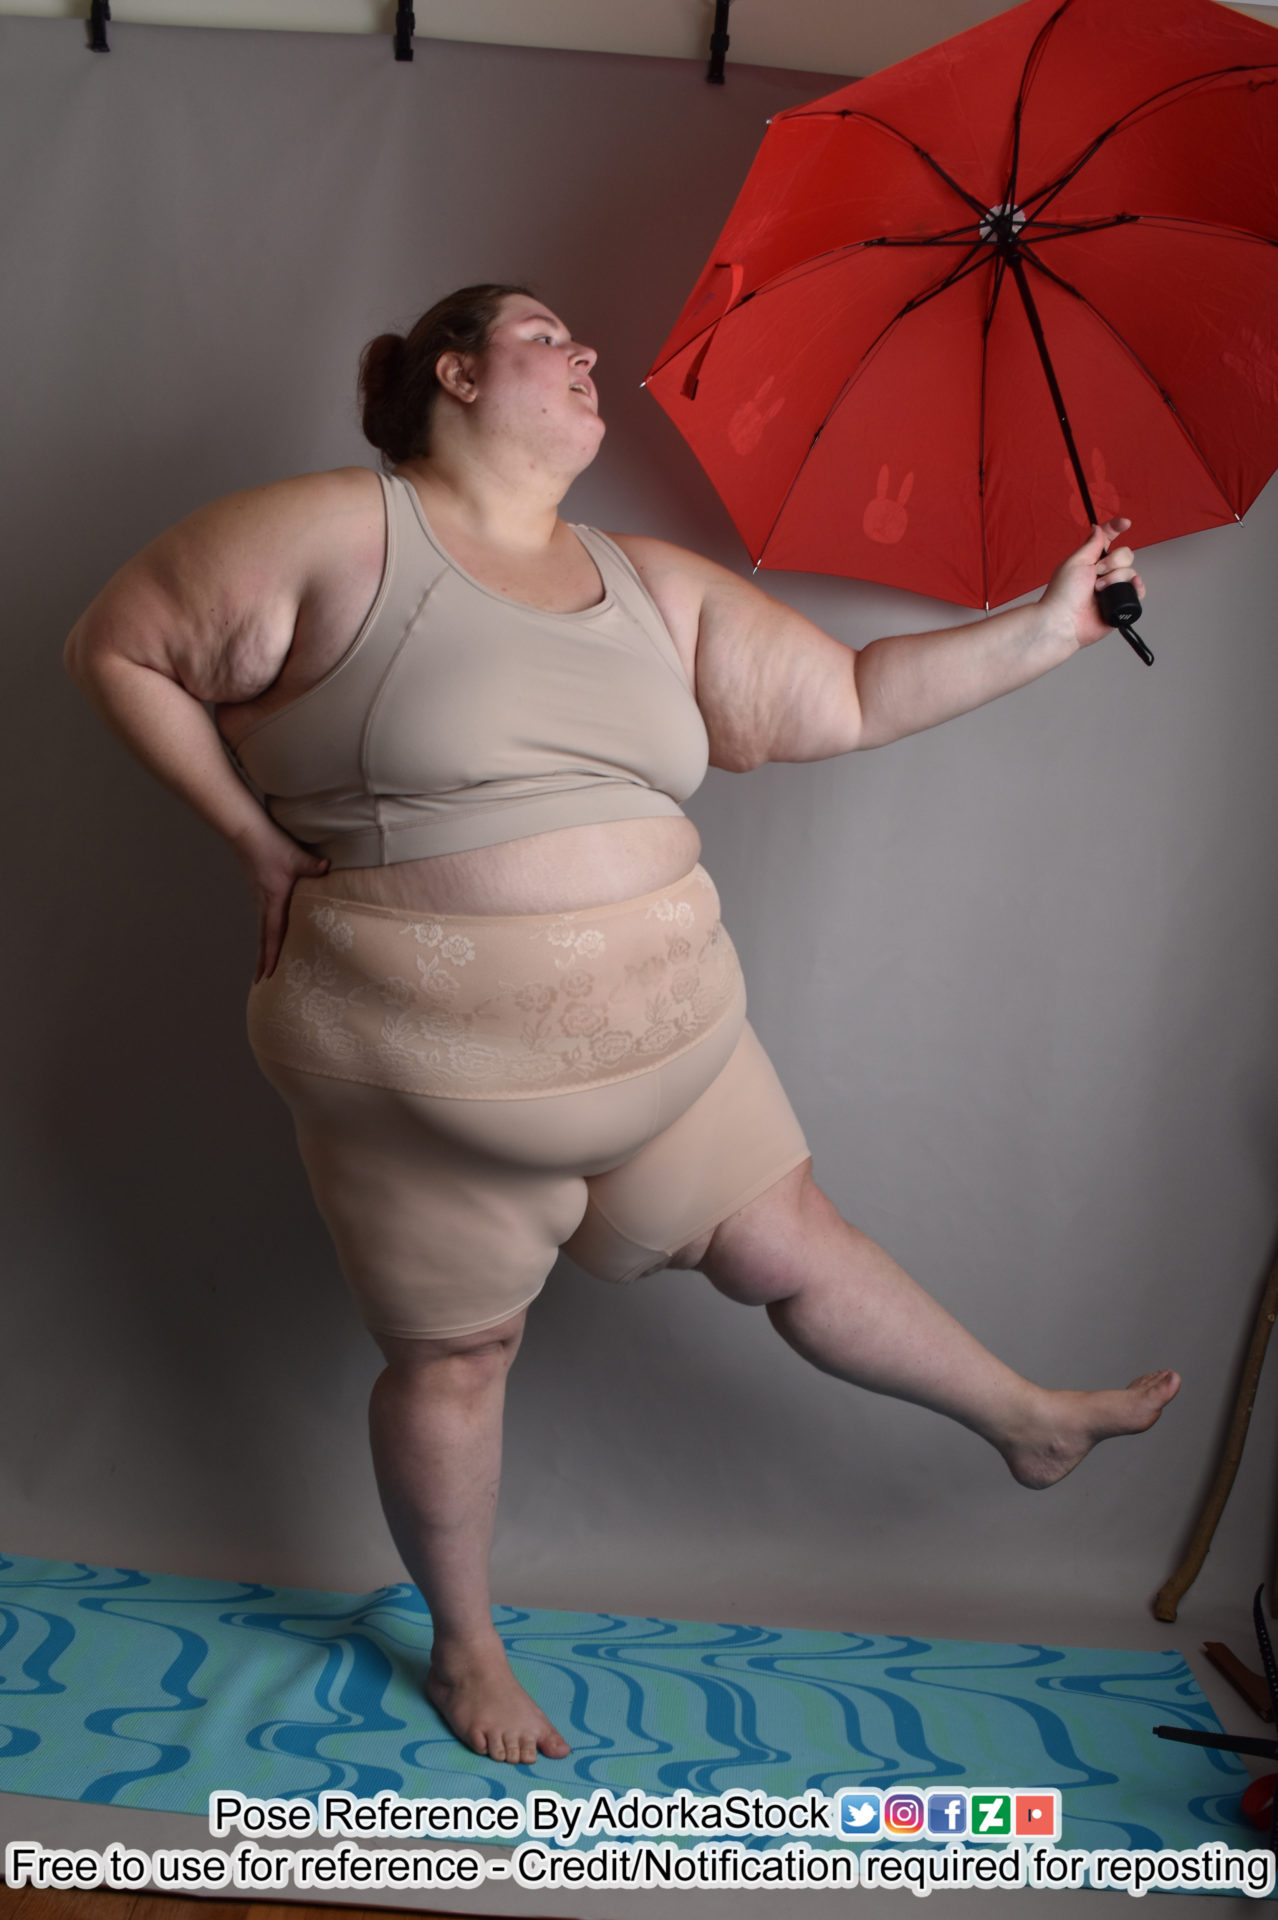 A heavyset woman in a grey sports bra and nude colored shapewear shorts and holding a red umbrella with white rabbits on it off to the side in her outstretched left hand. Her left leg is raised and out to the side. Her right hand is on her hip and her mouth is open like she's singing and dancing